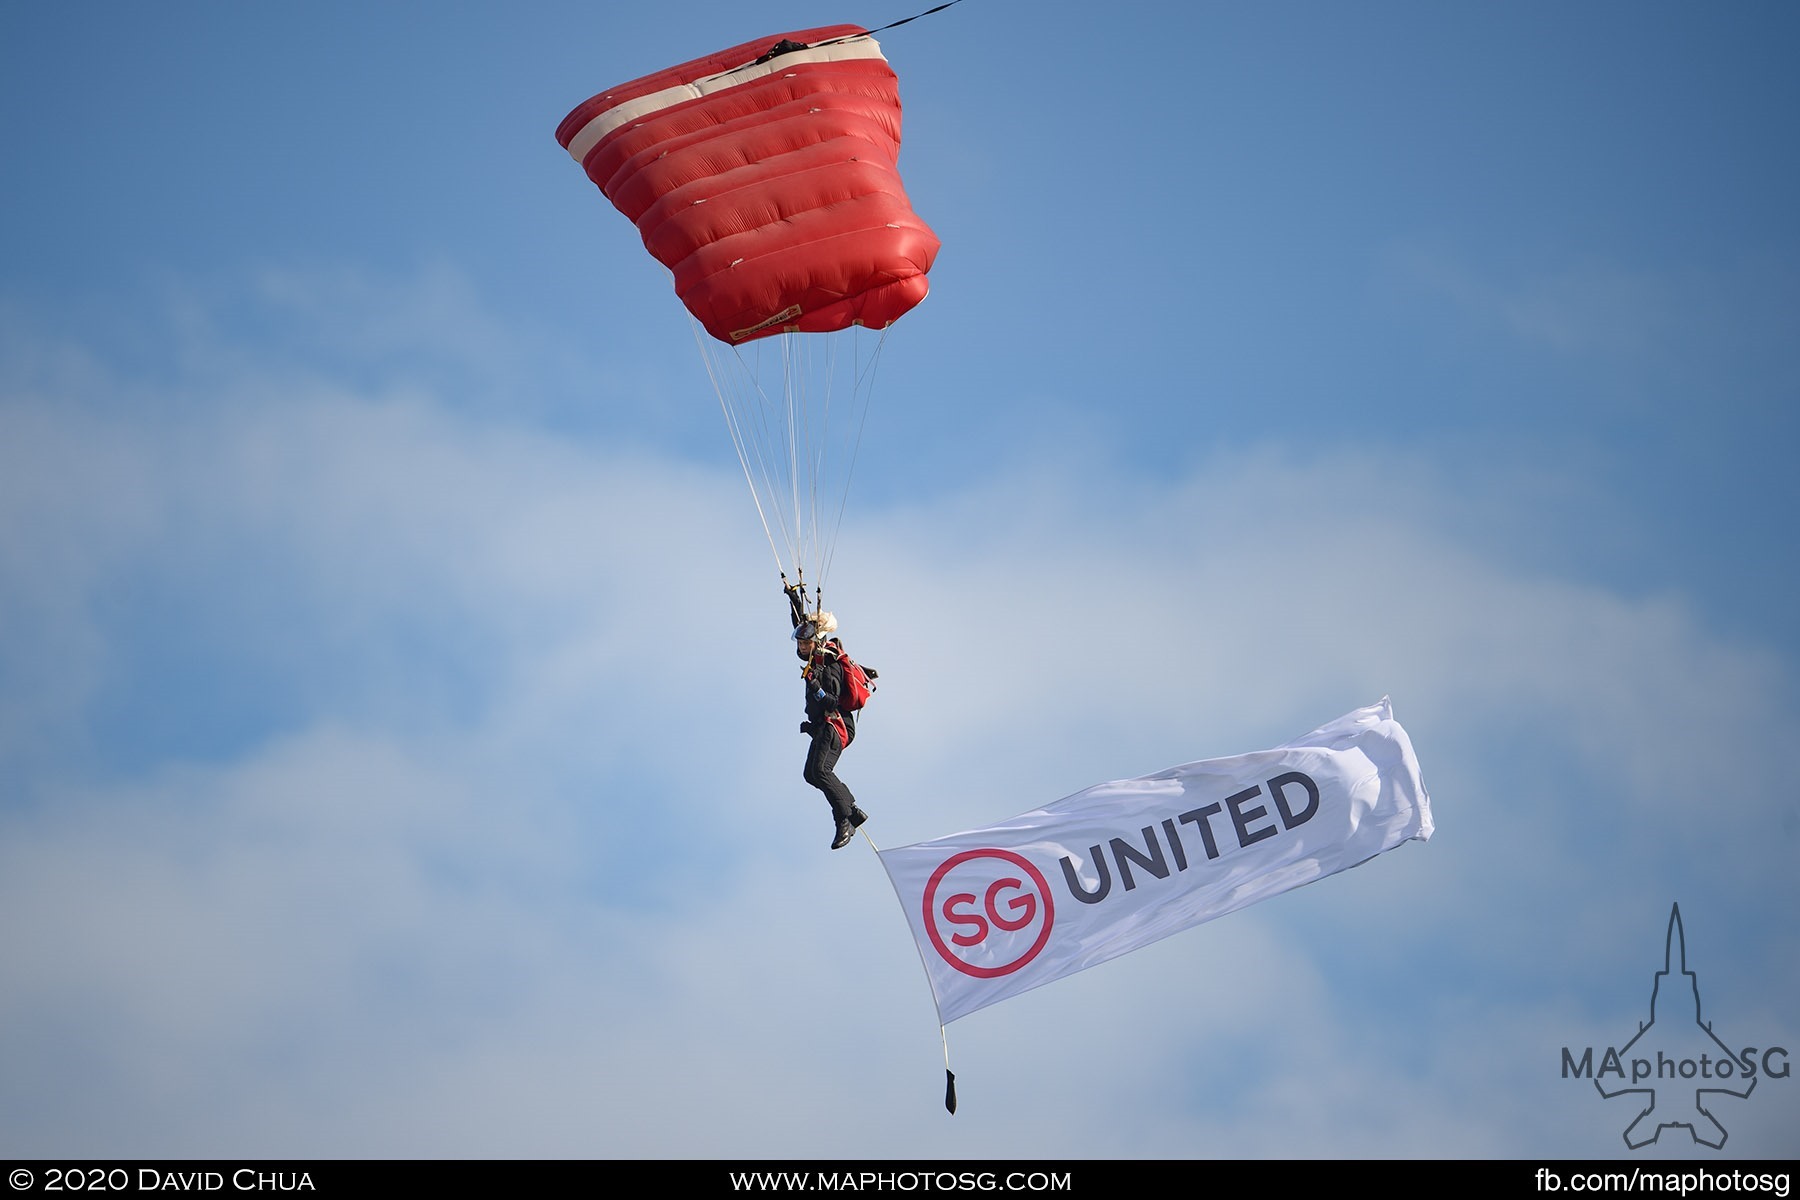 The Red Lions Freefall team member with a SG UNITED banner.